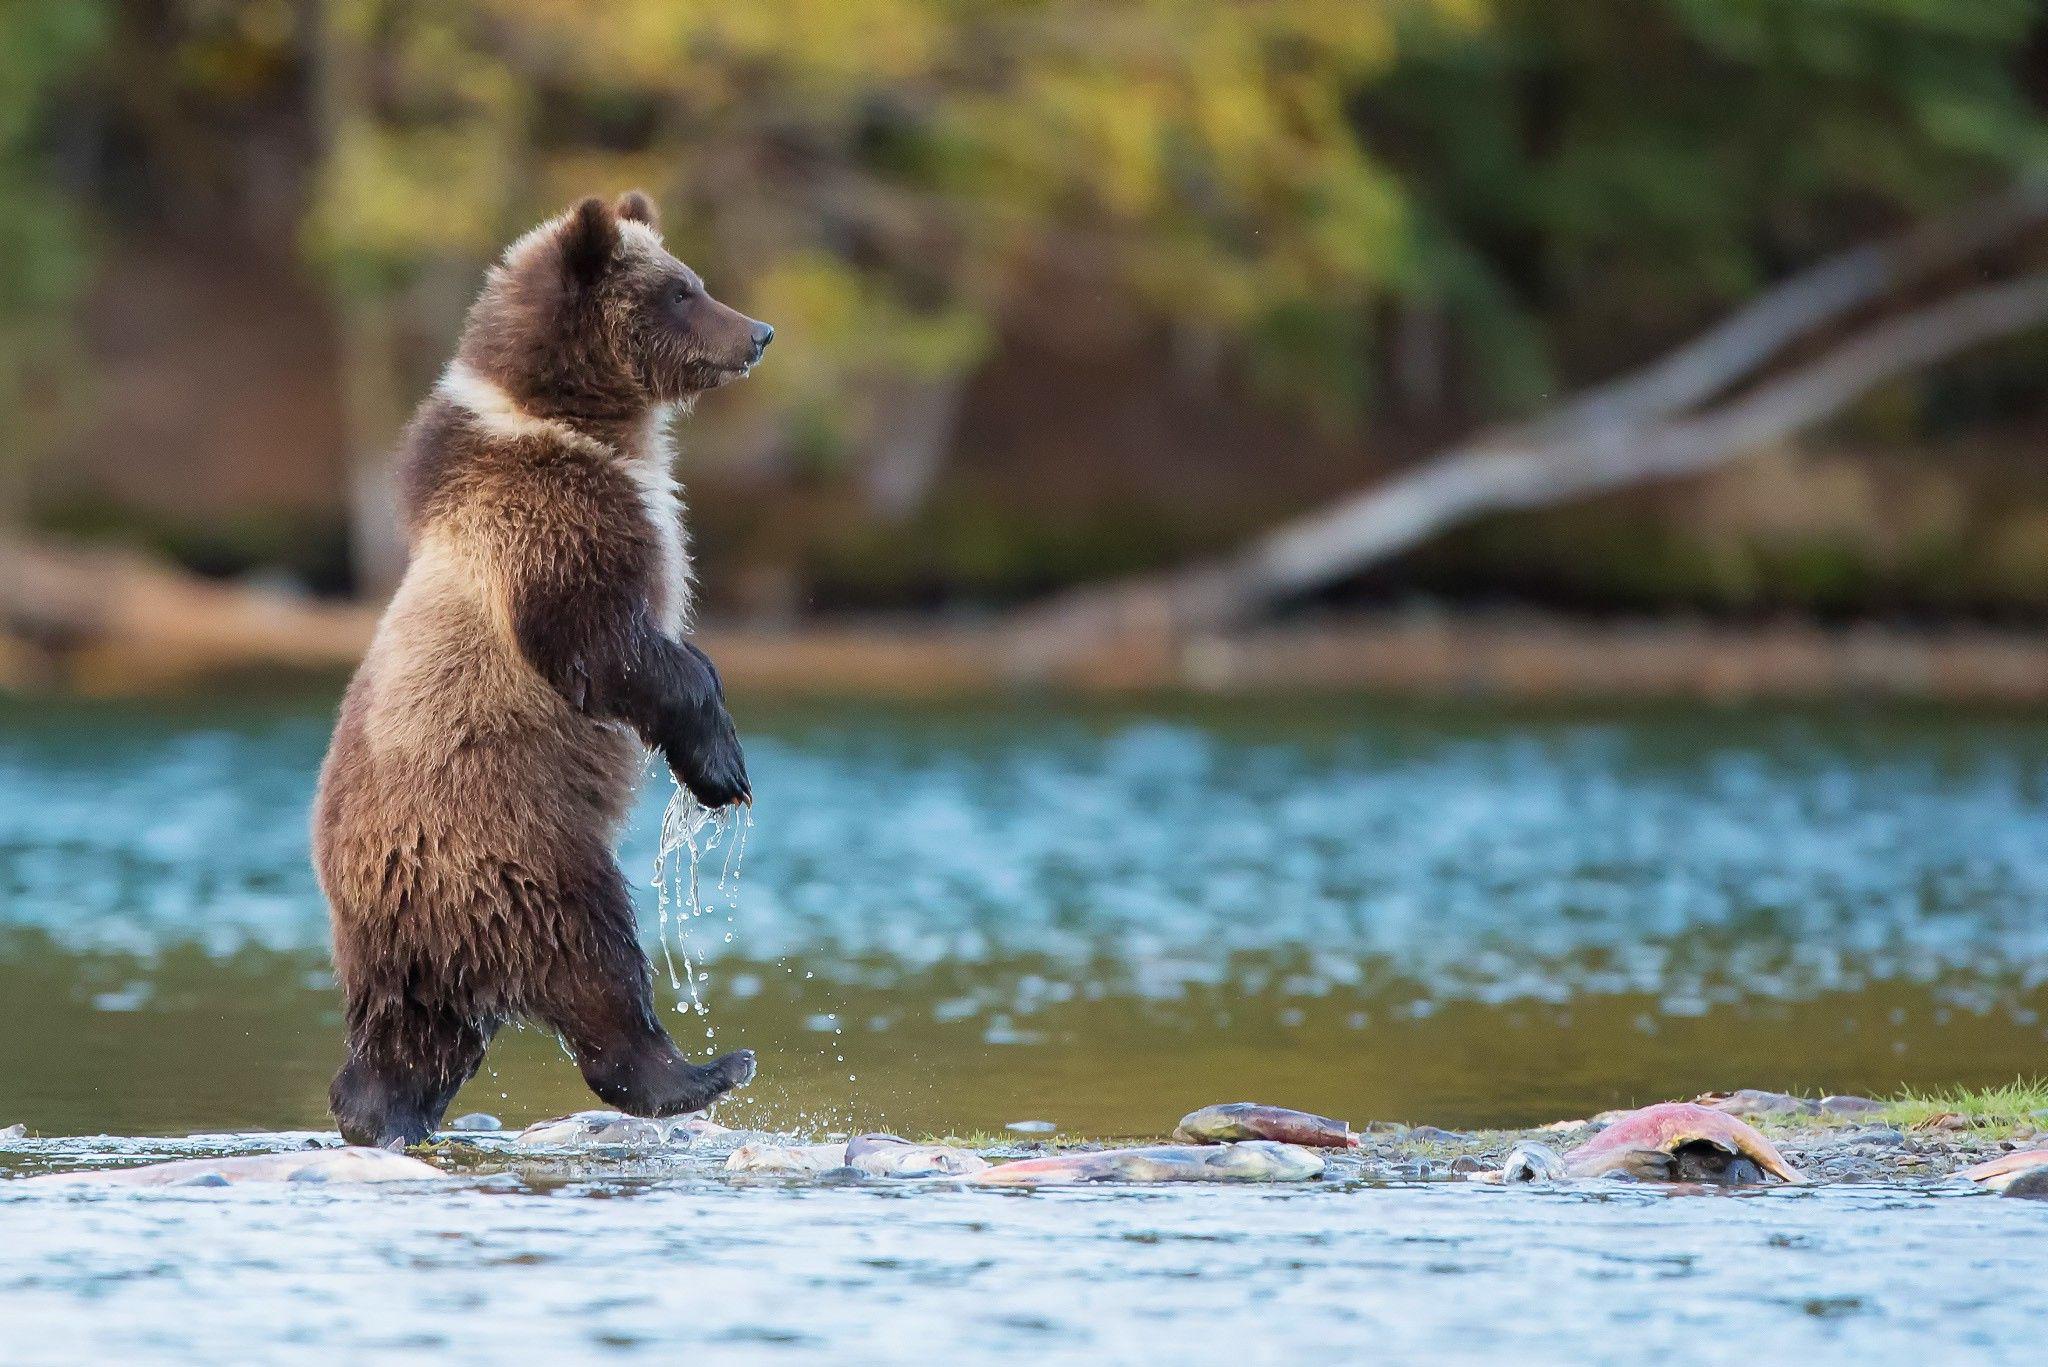 bears, Nature, Animals, River, Baby Animals, Grizzly Bears